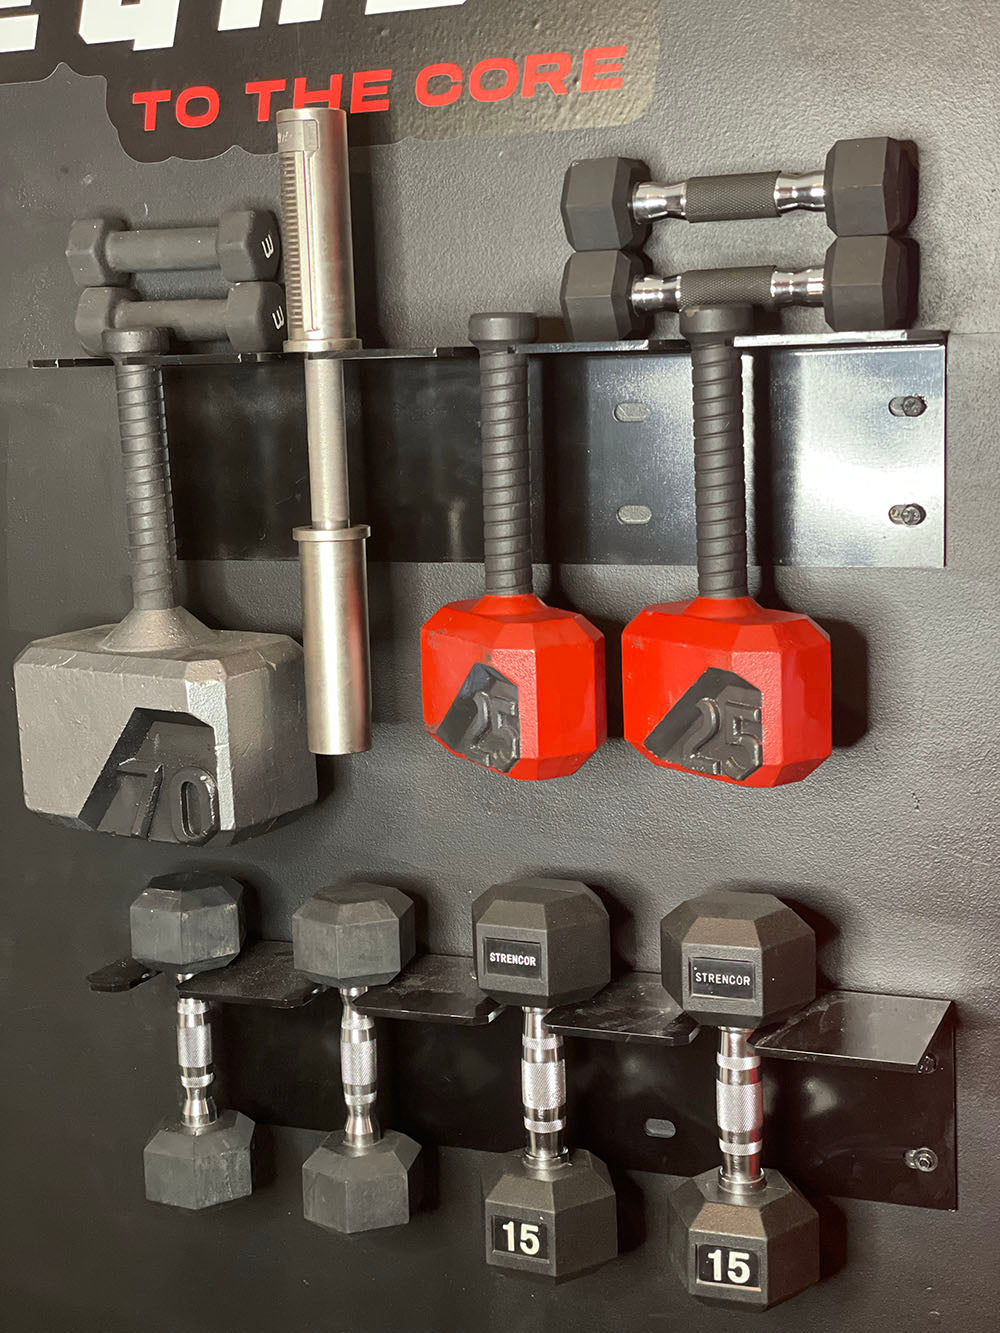 The wall mounted Single Row Dumbbell Holder is space-saving and designed to help you save floor space. This image presents the Single Row Dumbbell Holder mounted on the wall, full of dumbbells.